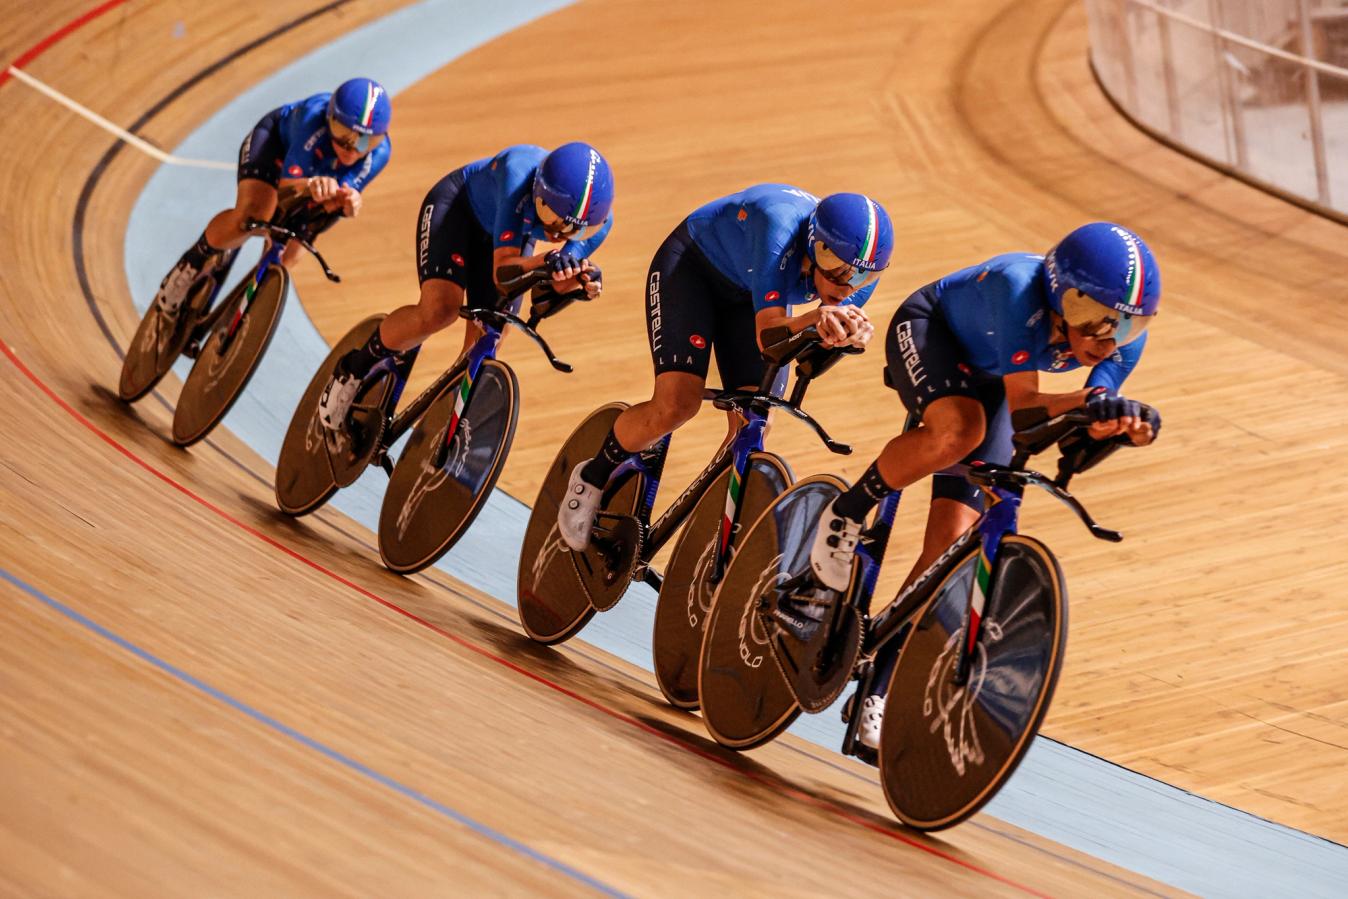 The Italian track team has been training on the new models at their base in Montichiari